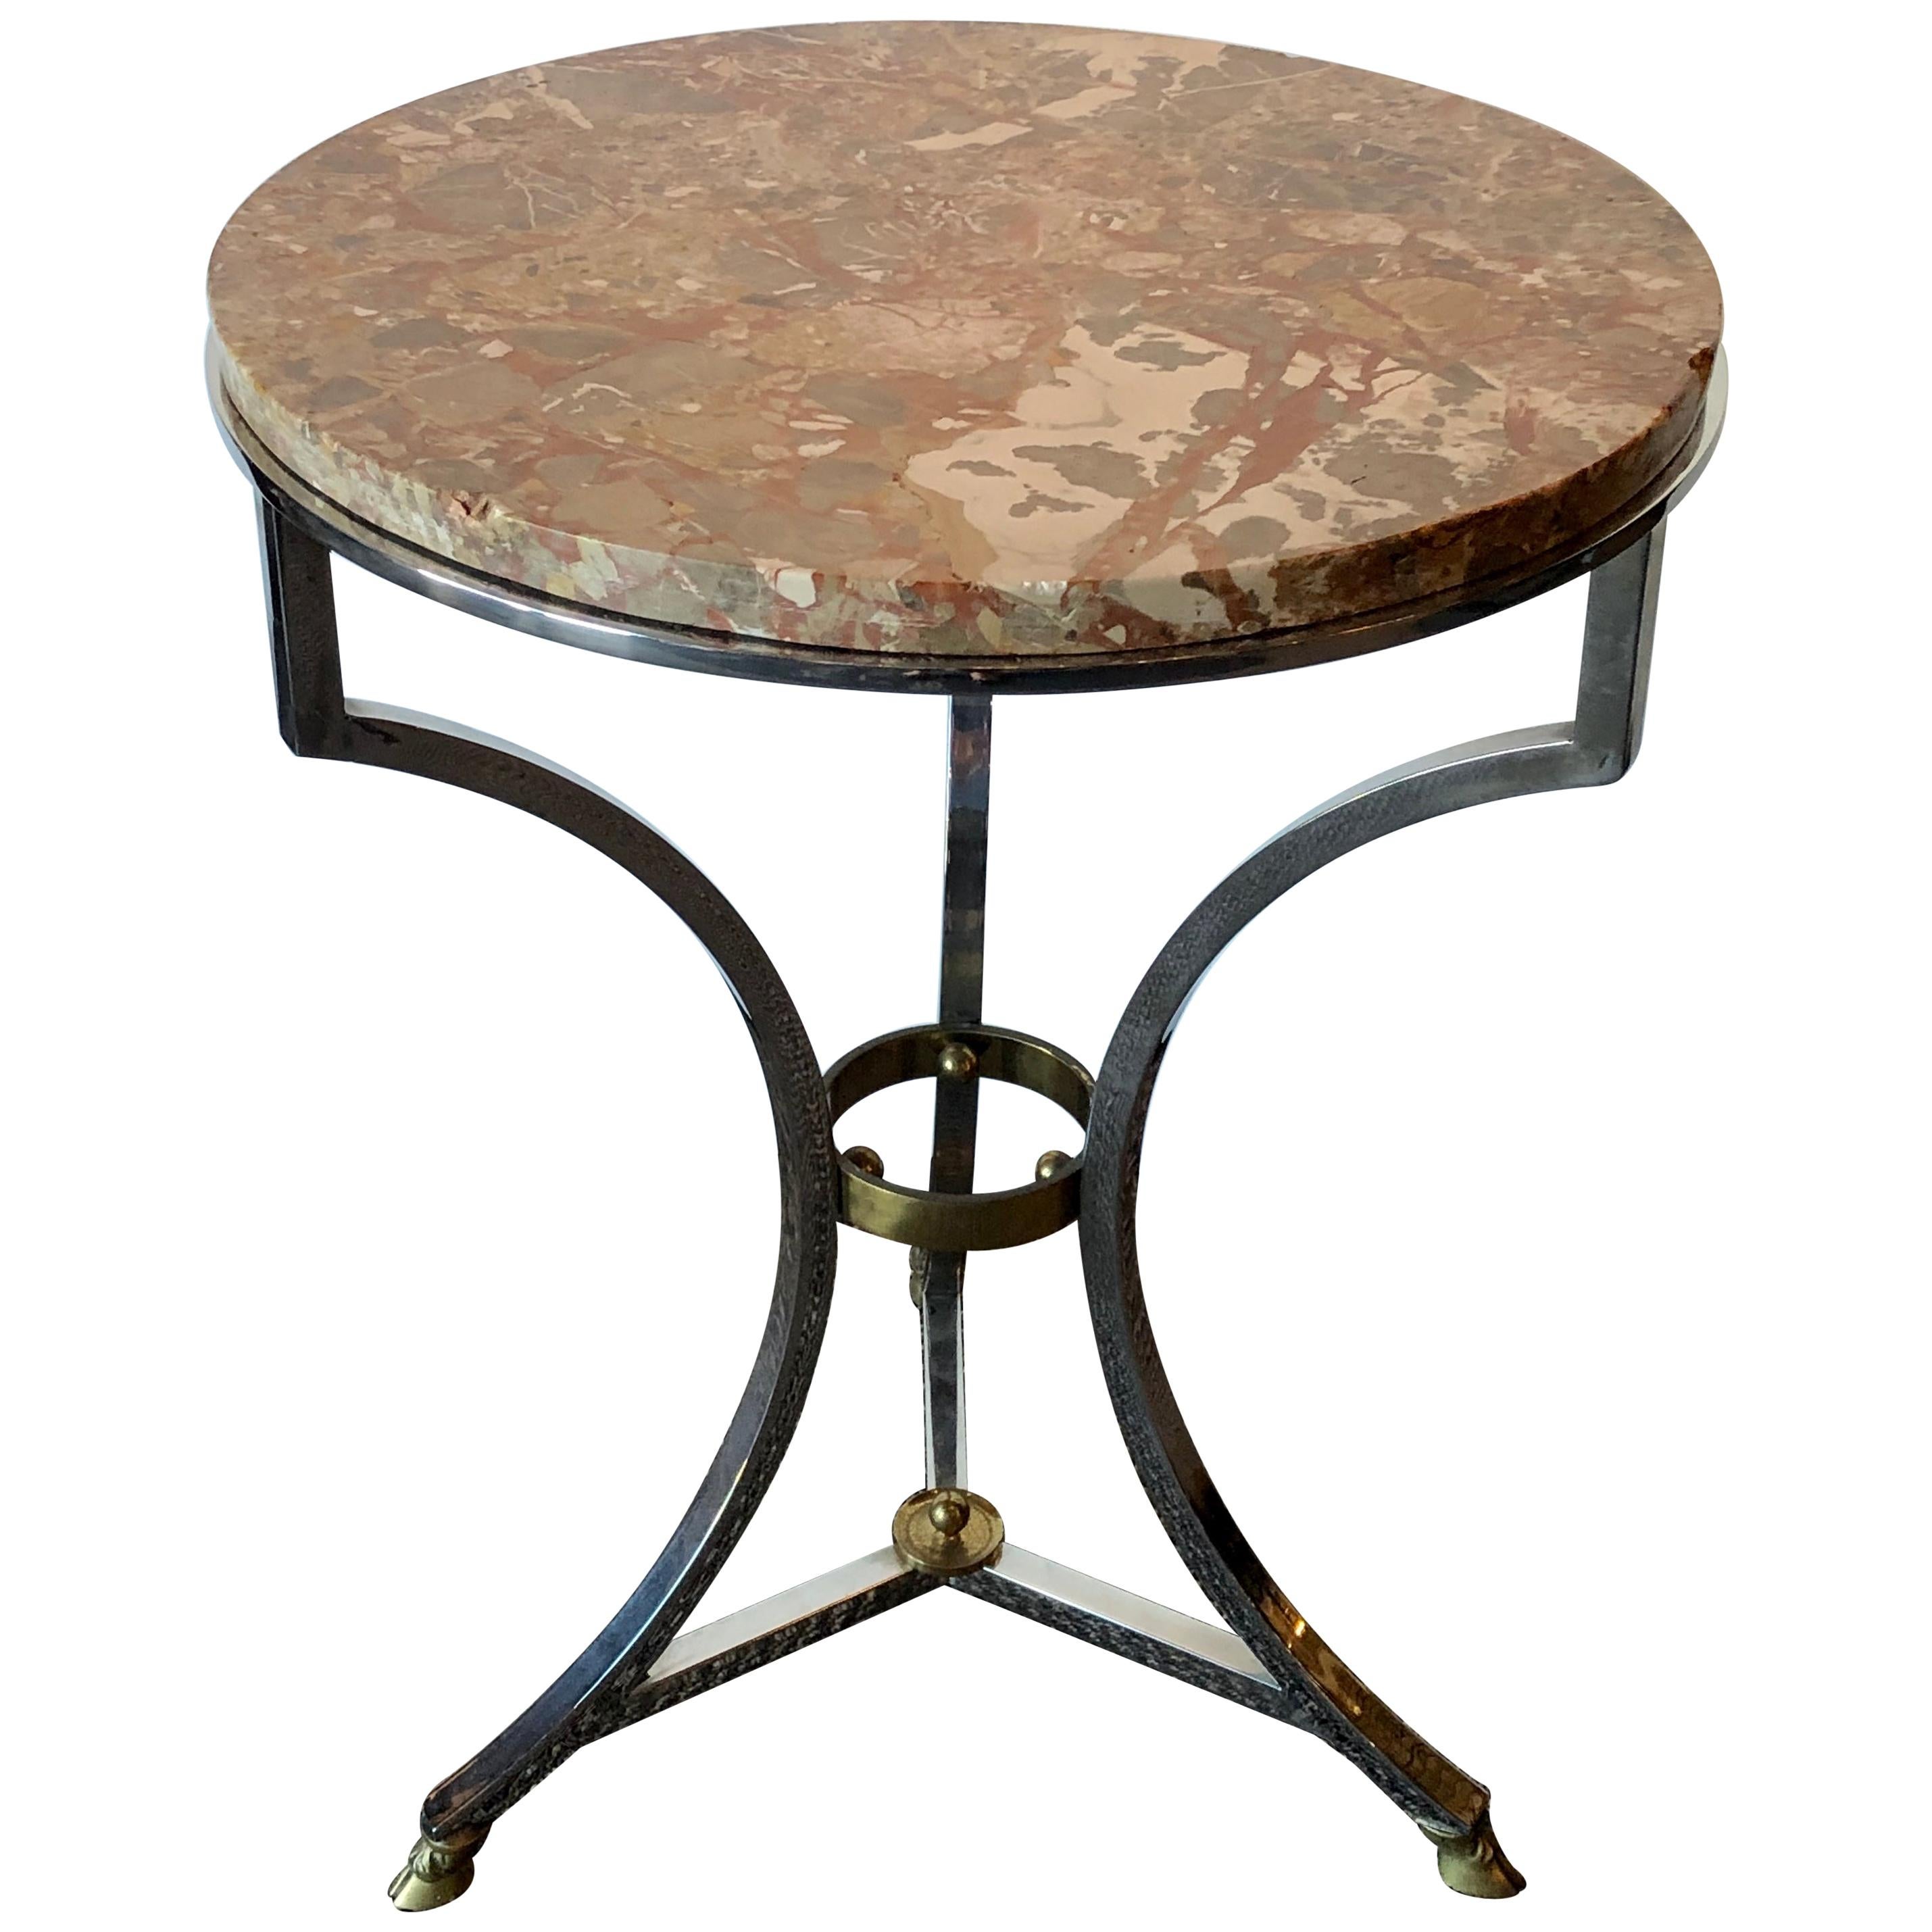 Steel and Bronze Jansen Claw Foot Bouilliotte or End Table with a Marble Top